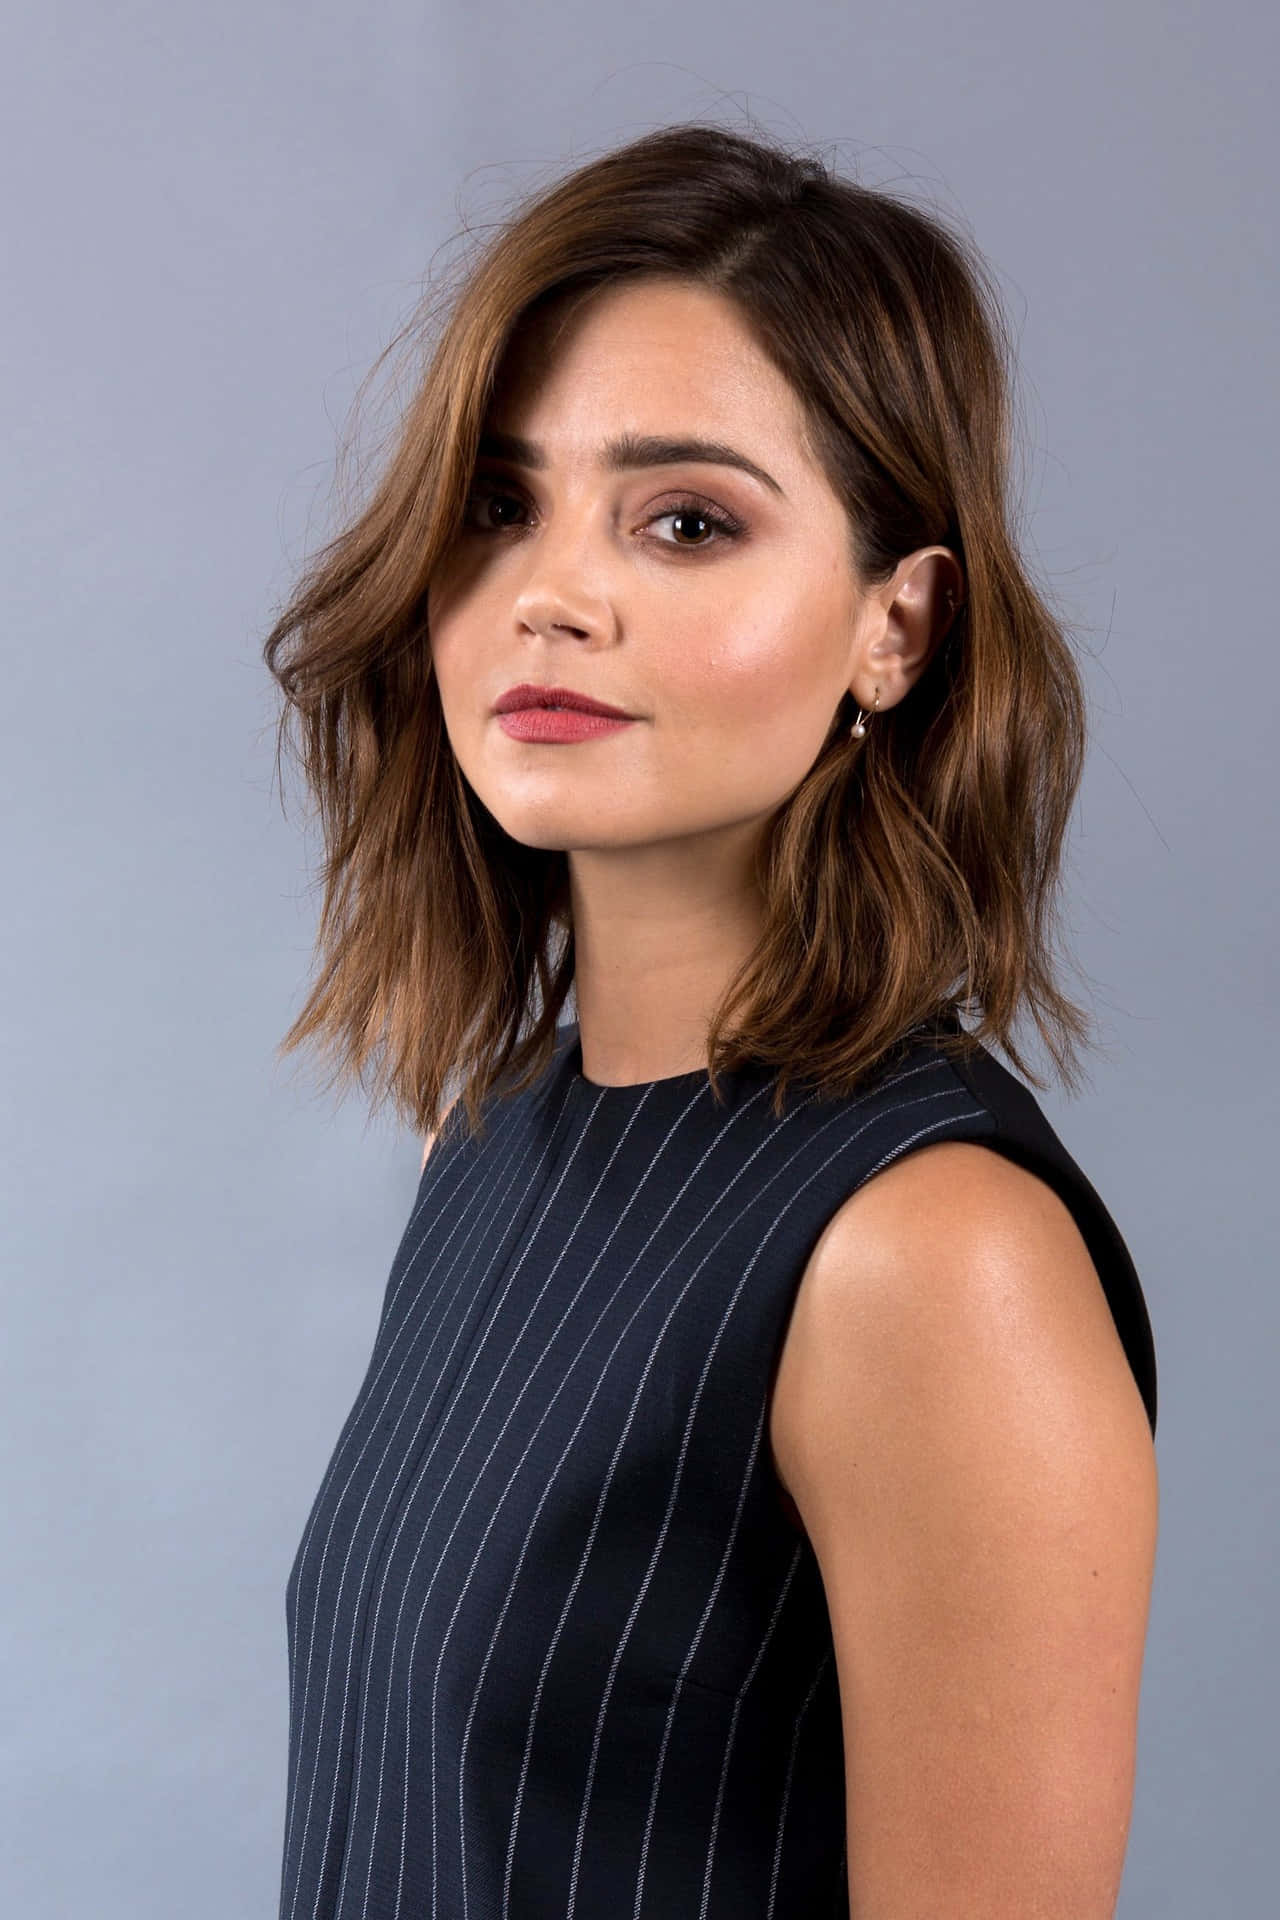 Jenna Coleman In A Stylish Outfit Background